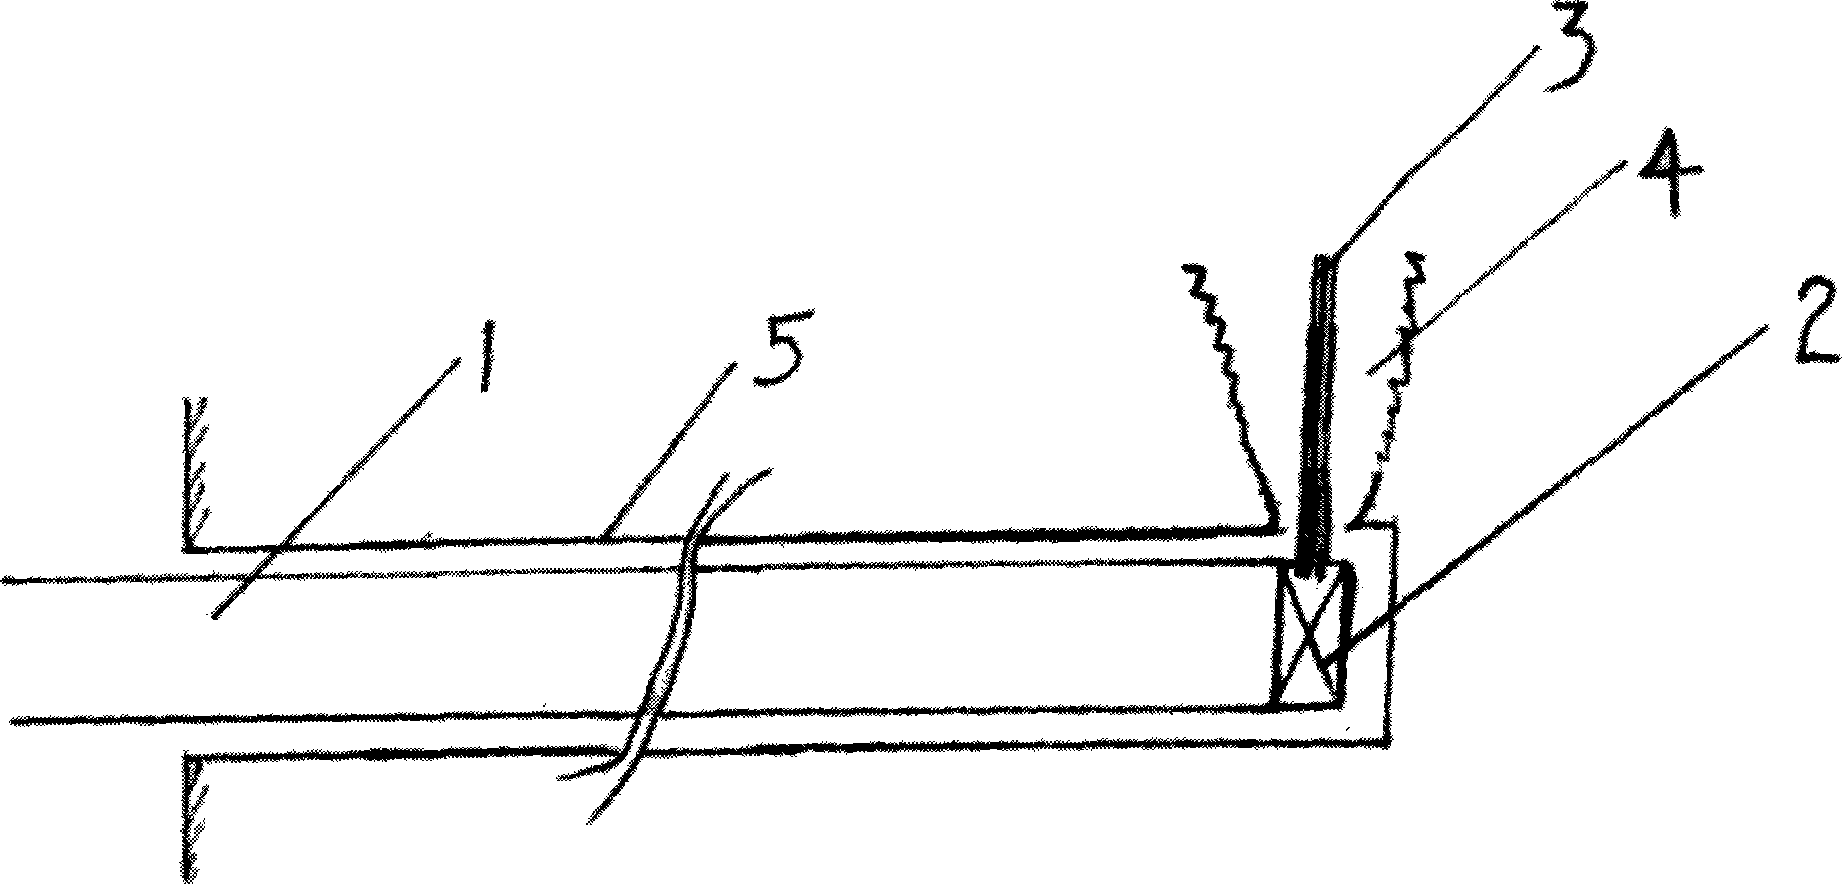 Drilling hole inside directional dissevering method